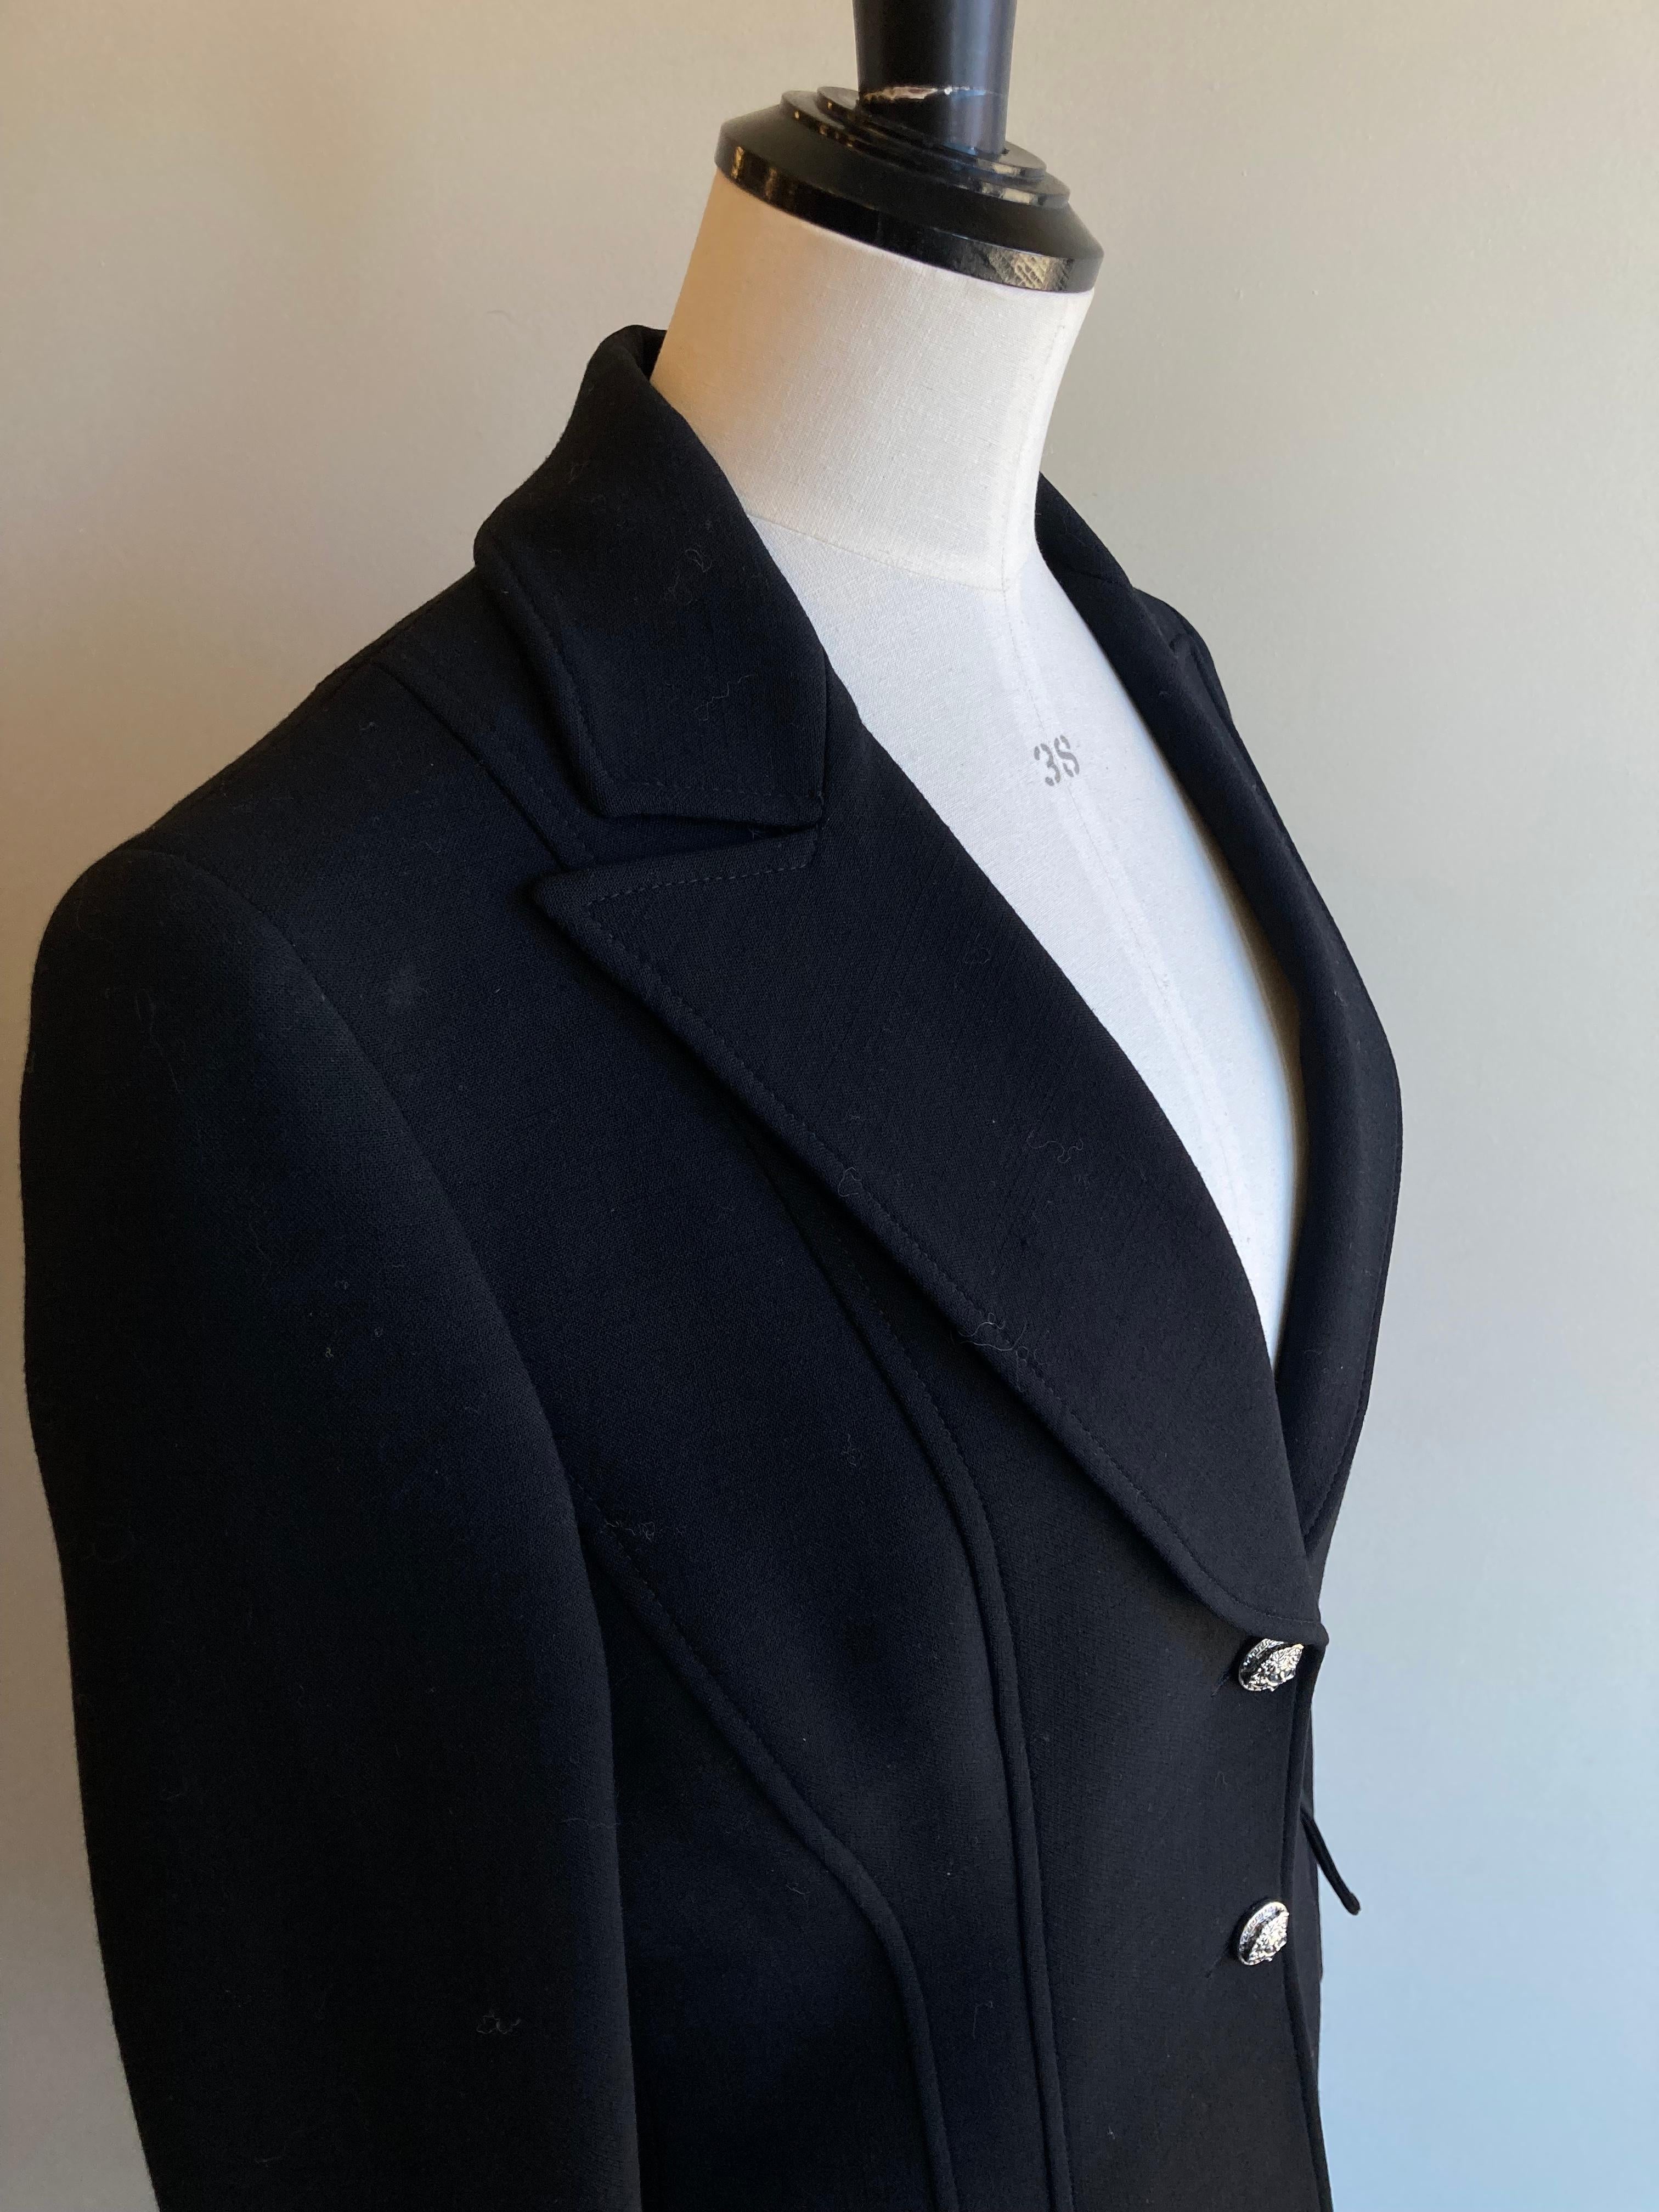 Vintage Zipped Skirt Suit For Sale 1